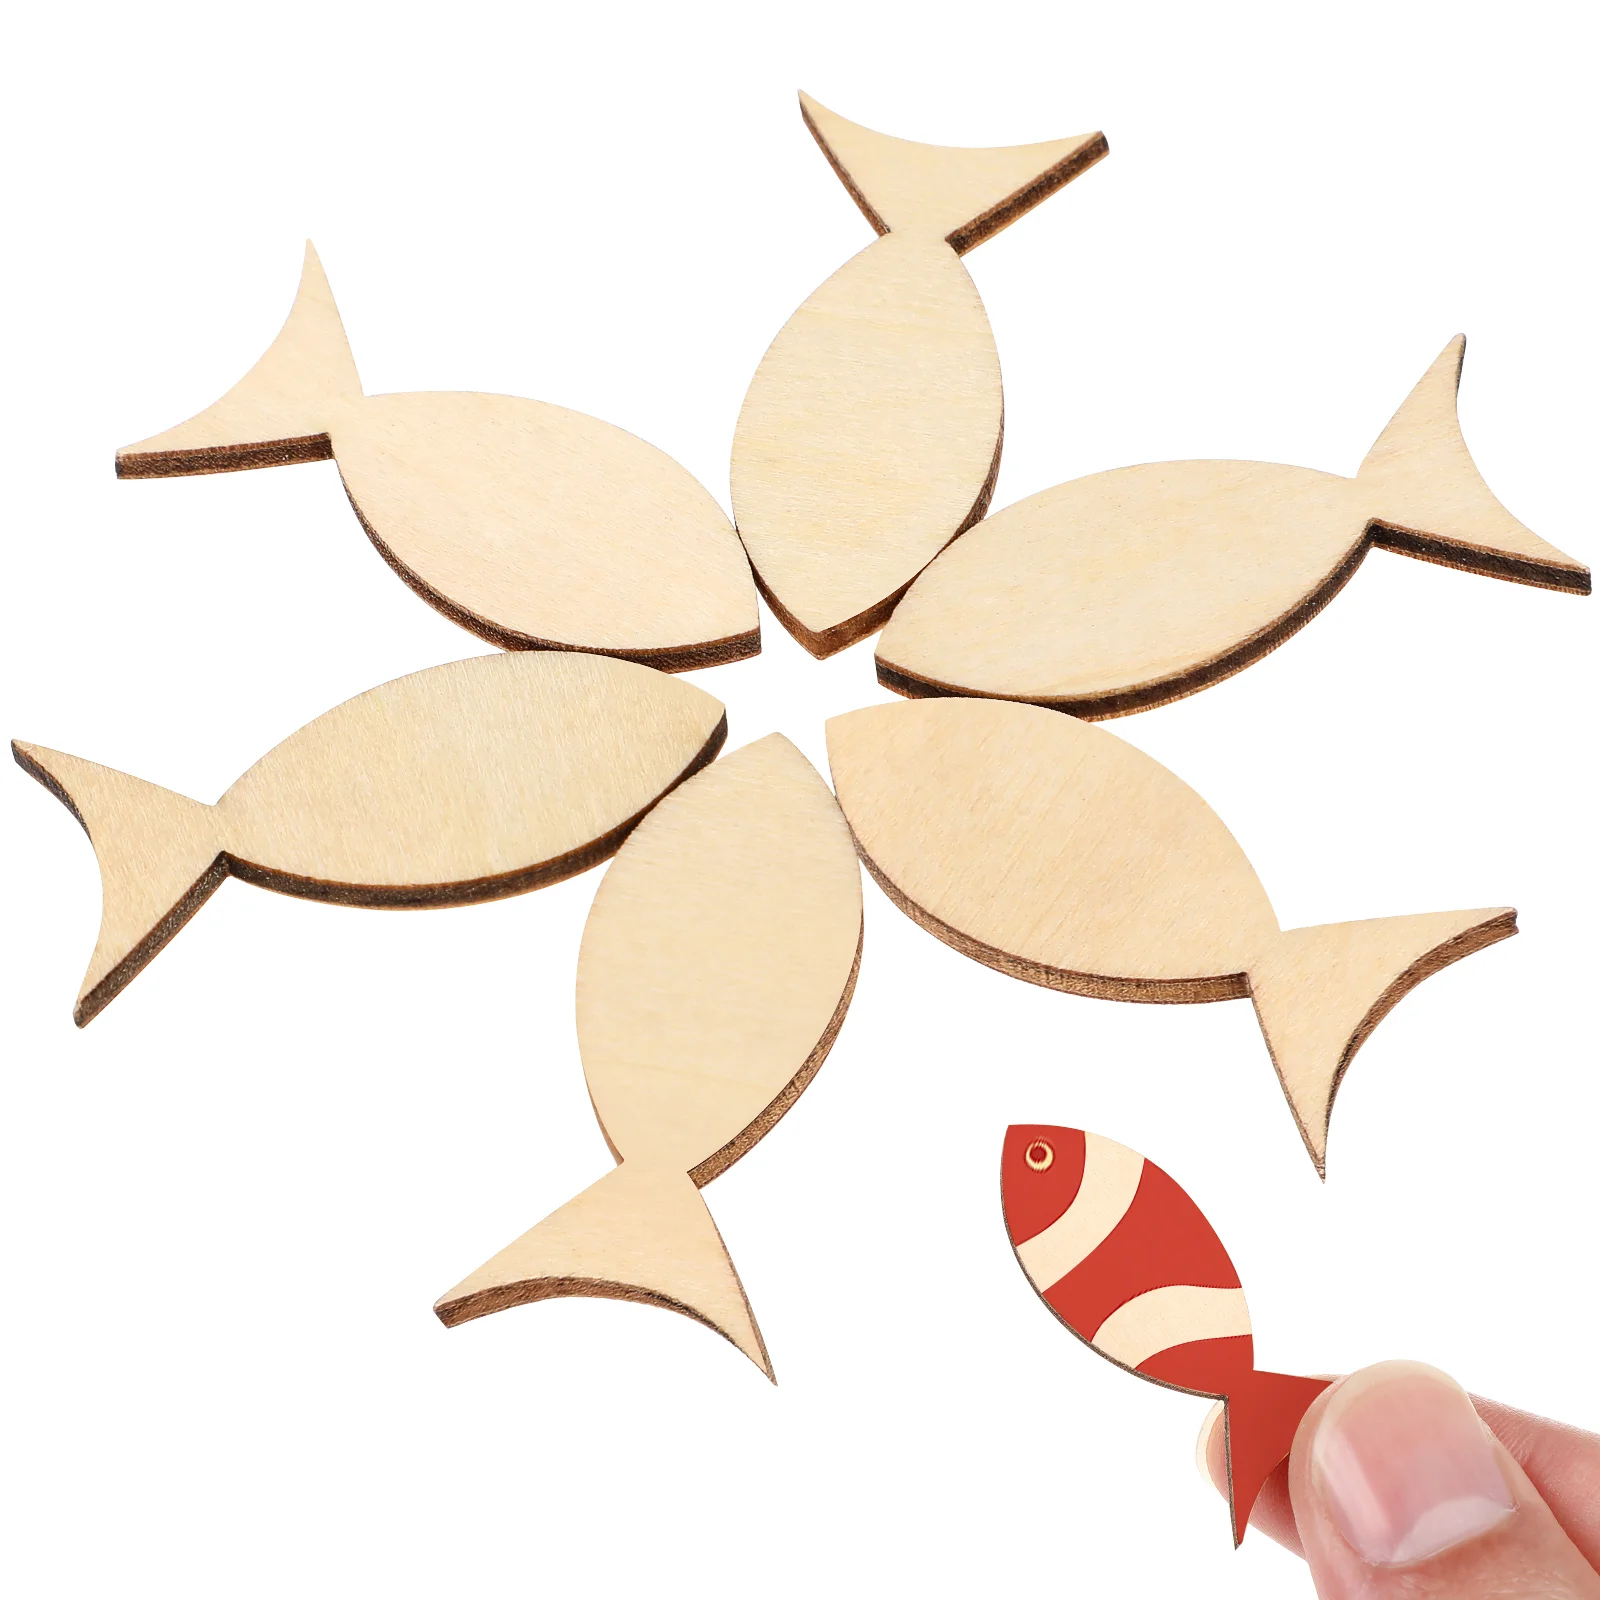 

100 Pcs Wooden Solid Fish Craft Chip Embellishments Unfinished Slices Basswood Board Ship Ornaments Shapes Crafting